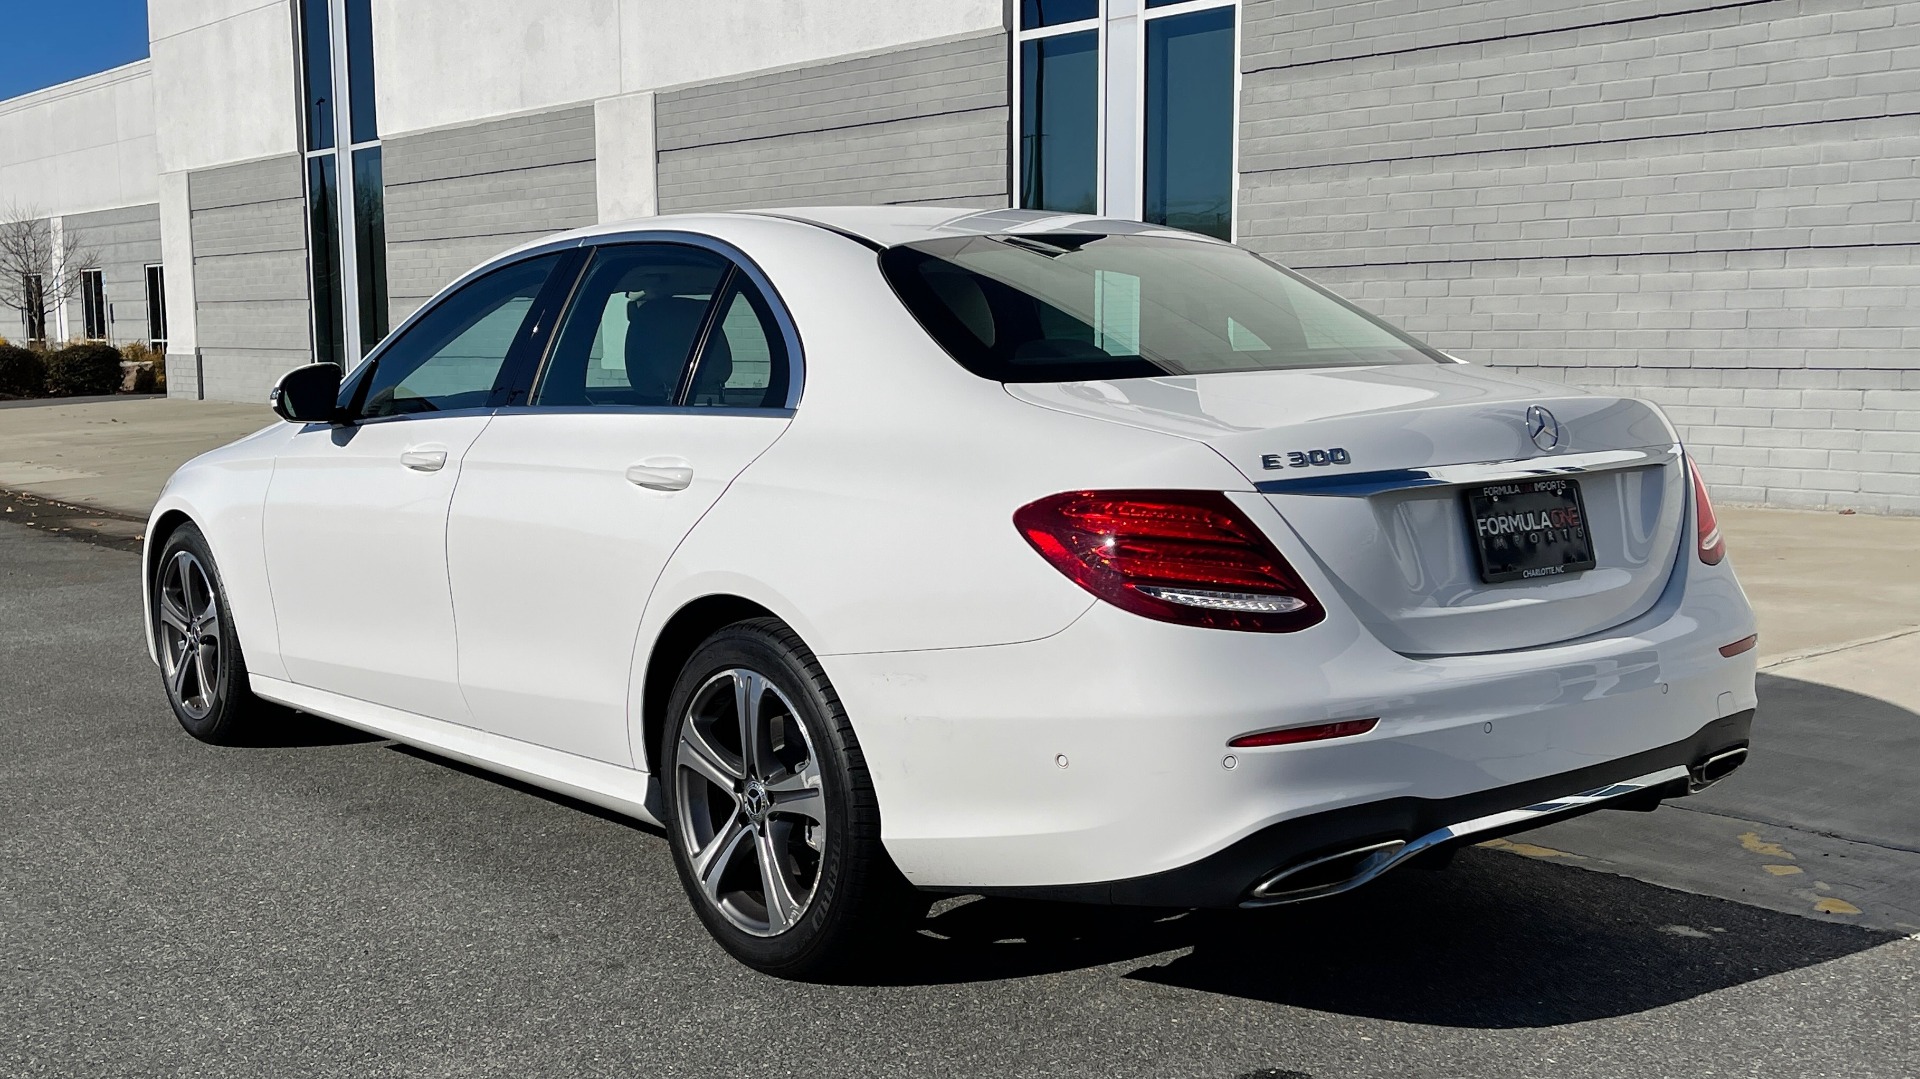 Used 2018 Mercedes-Benz E-CLASS E 300 2.0L SEDAN / RWD / 9-SPD AUTO / BLIND SPOT ASSIST / REARVIEW for sale $41,999 at Formula Imports in Charlotte NC 28227 4